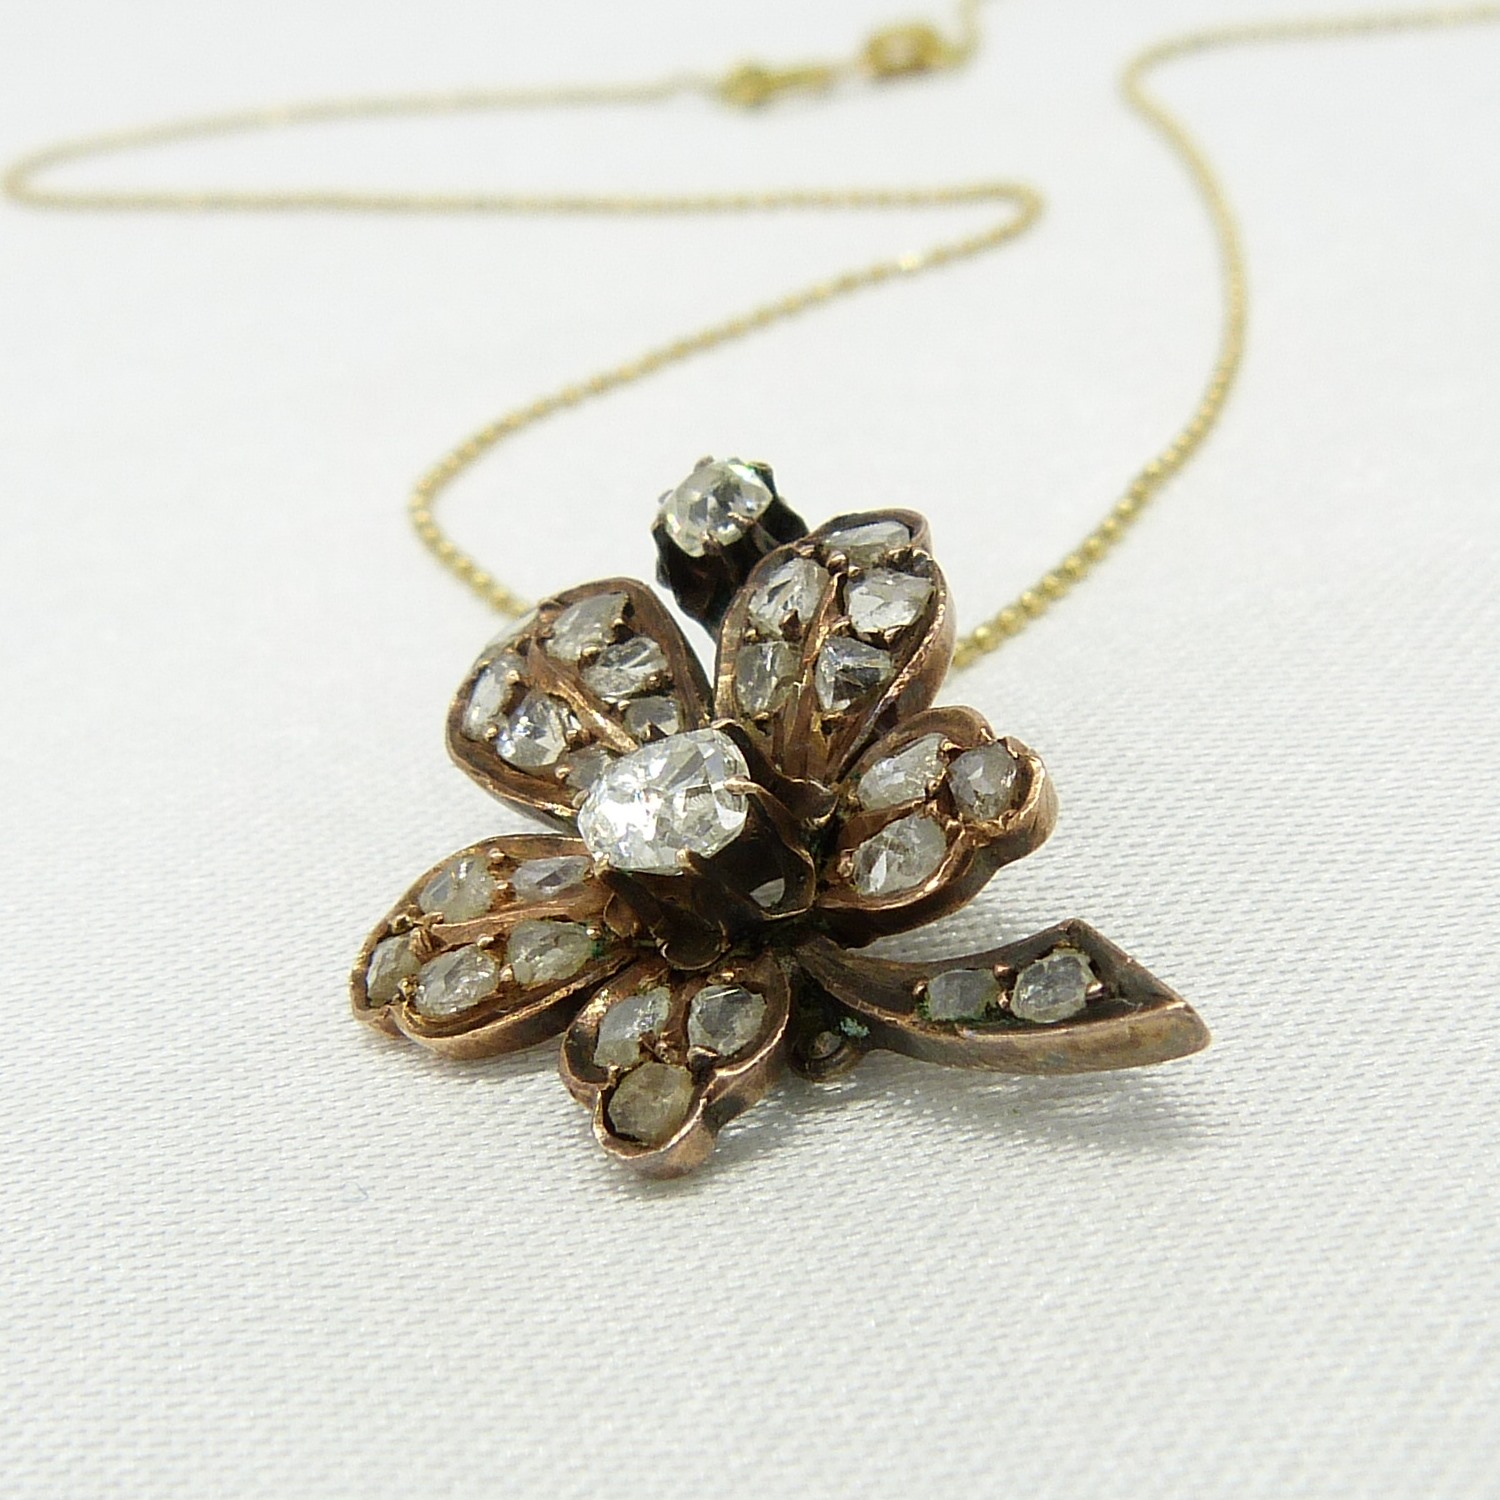 Antique old-cut and rose-cut diamond set flower pendant and chain, 14ct gold - Image 5 of 7